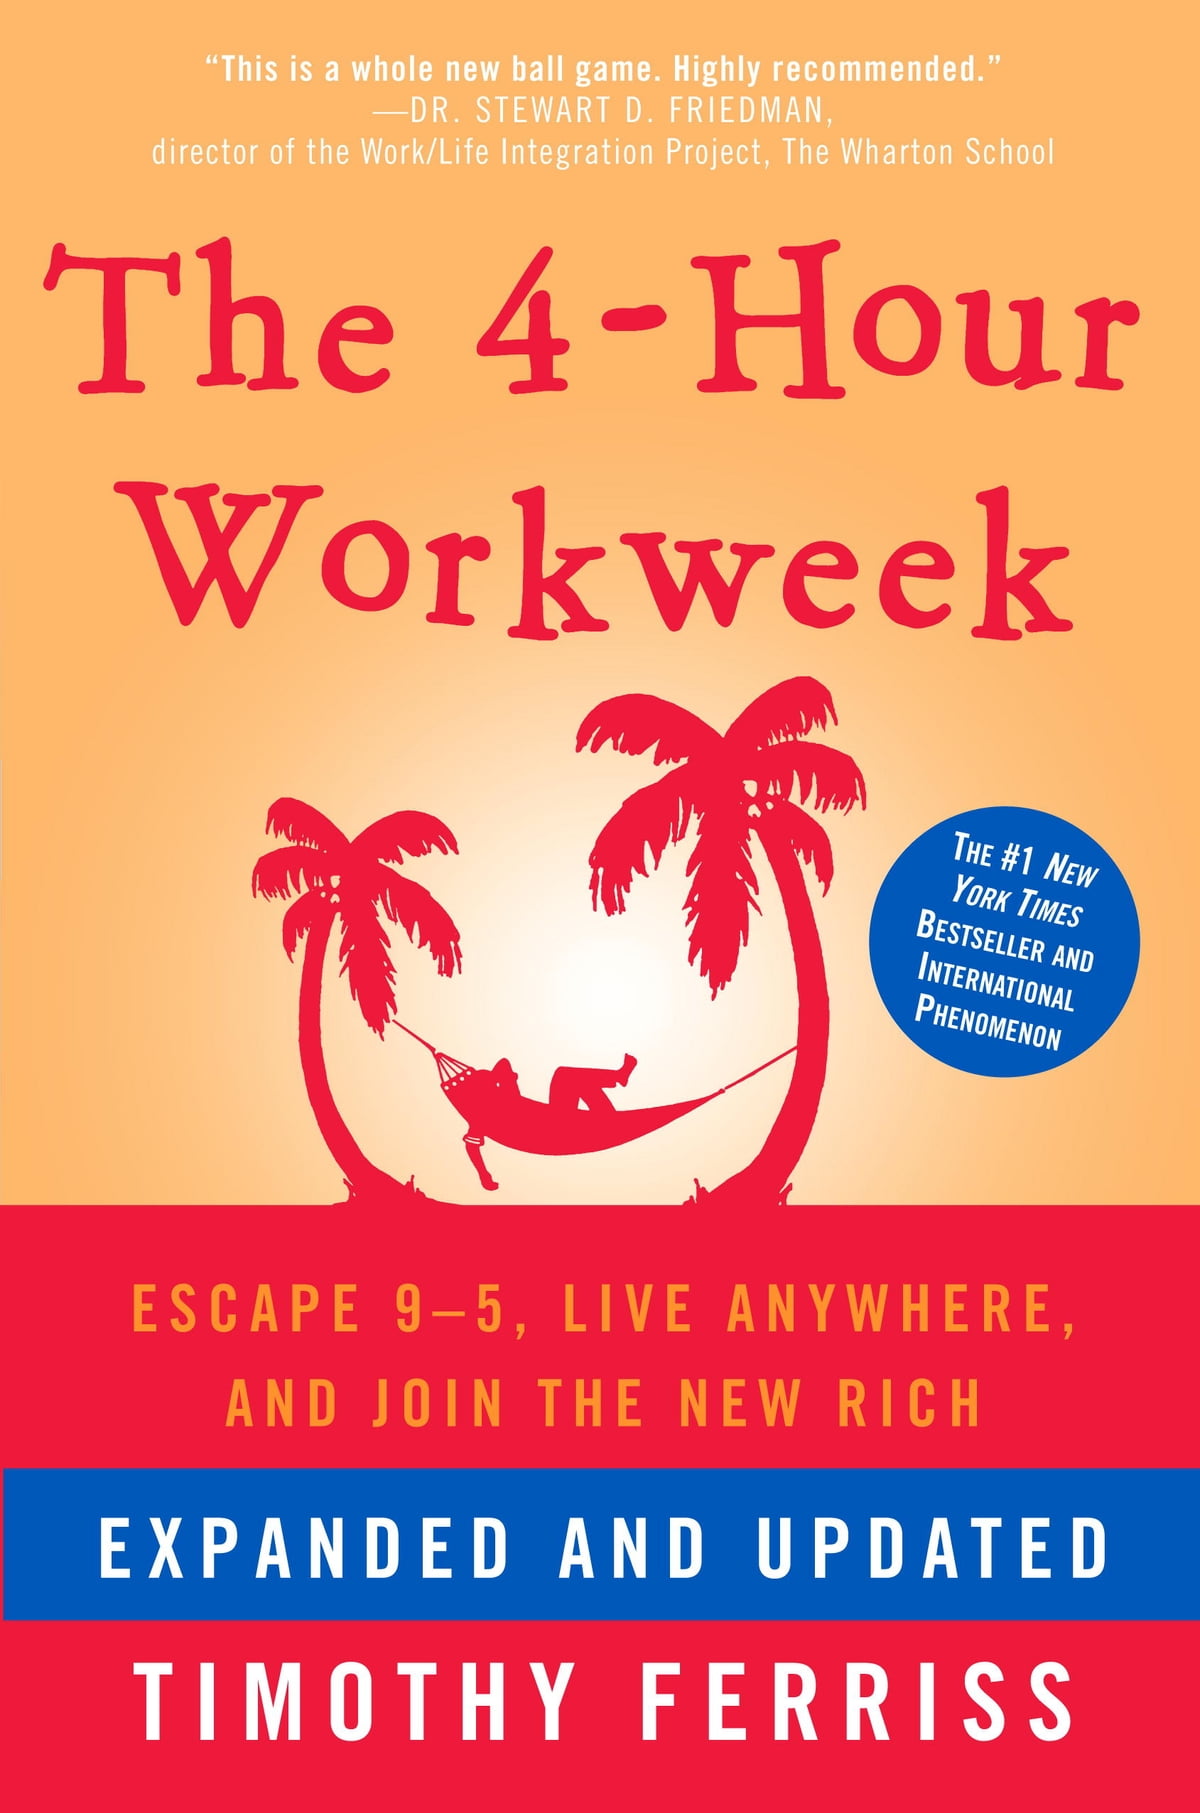 The 4-Hour Workweek by Timothy Ferriss